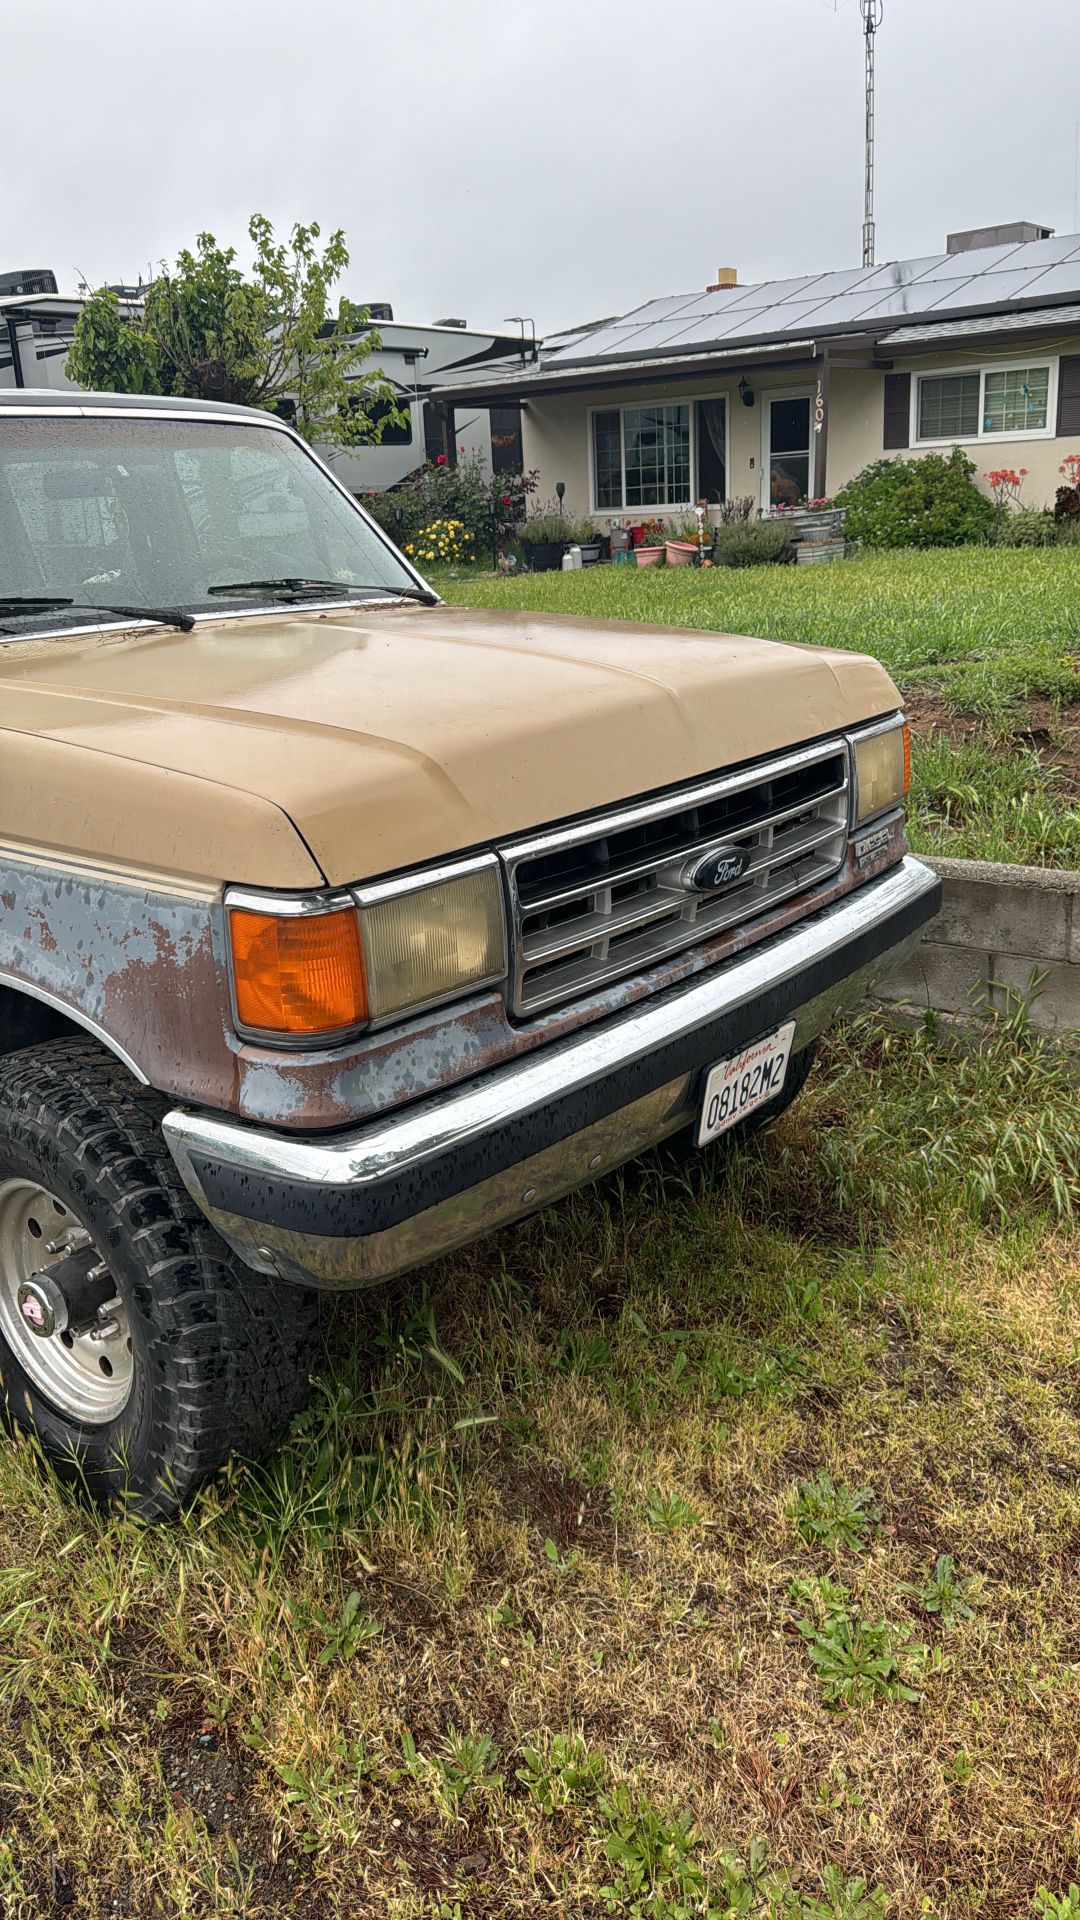 1987 Ford F-350